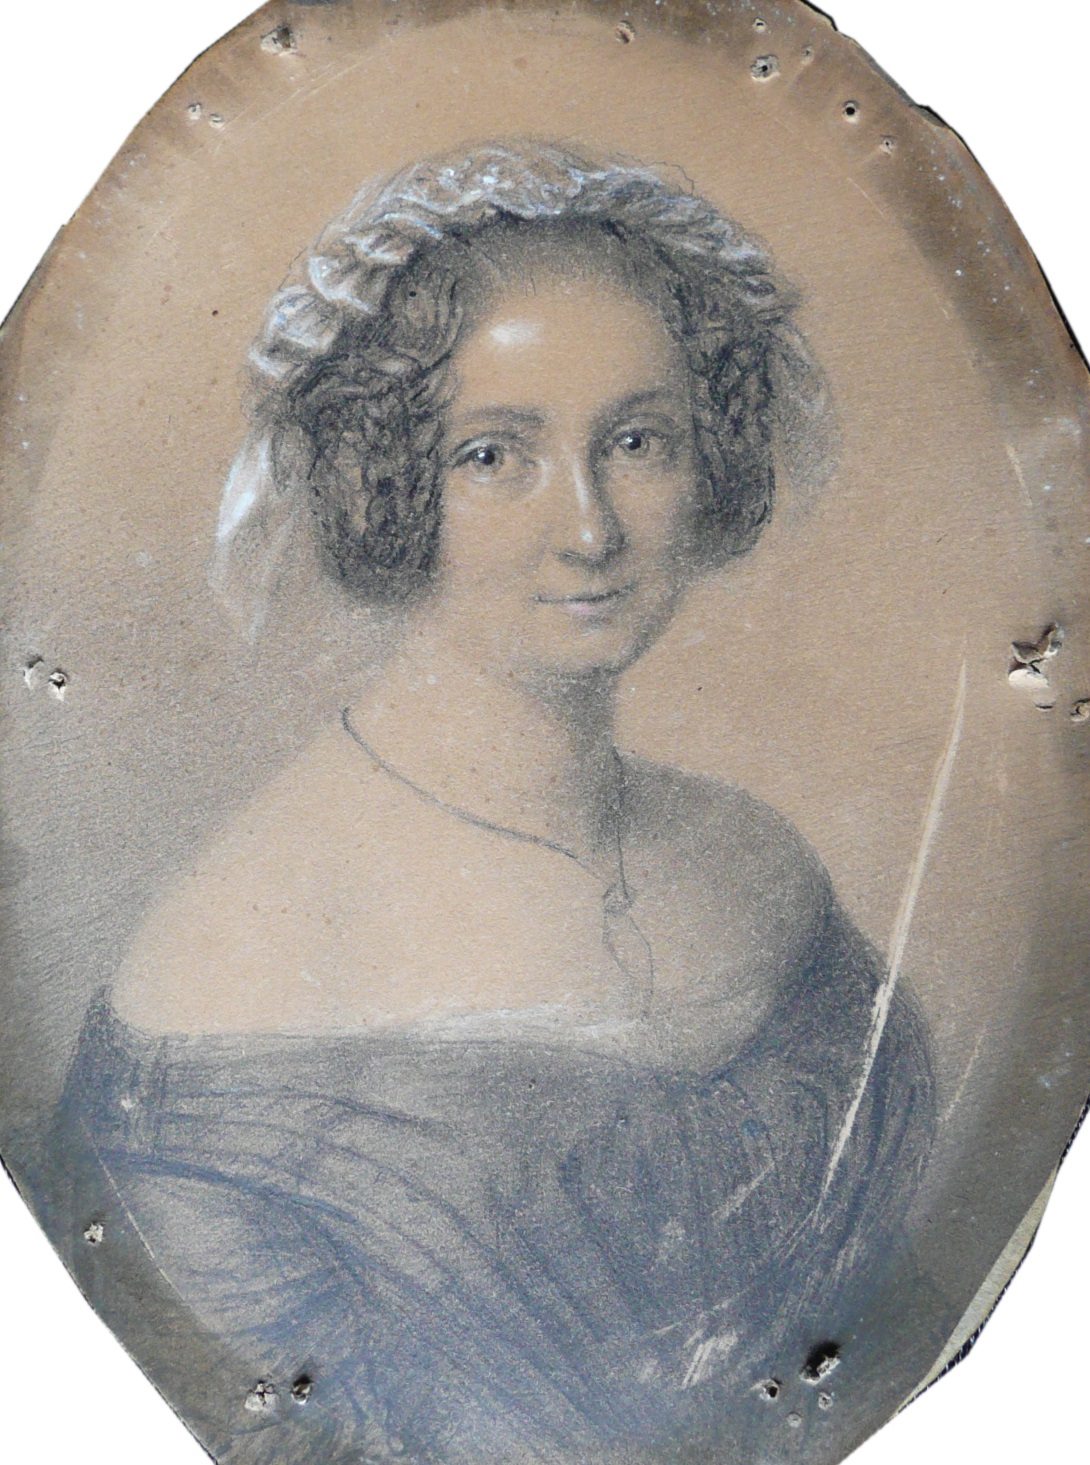  Dilia Helena (<a  href="https://rightsstatements.org/page/InC/1.0/?language=de">InC</a>) 